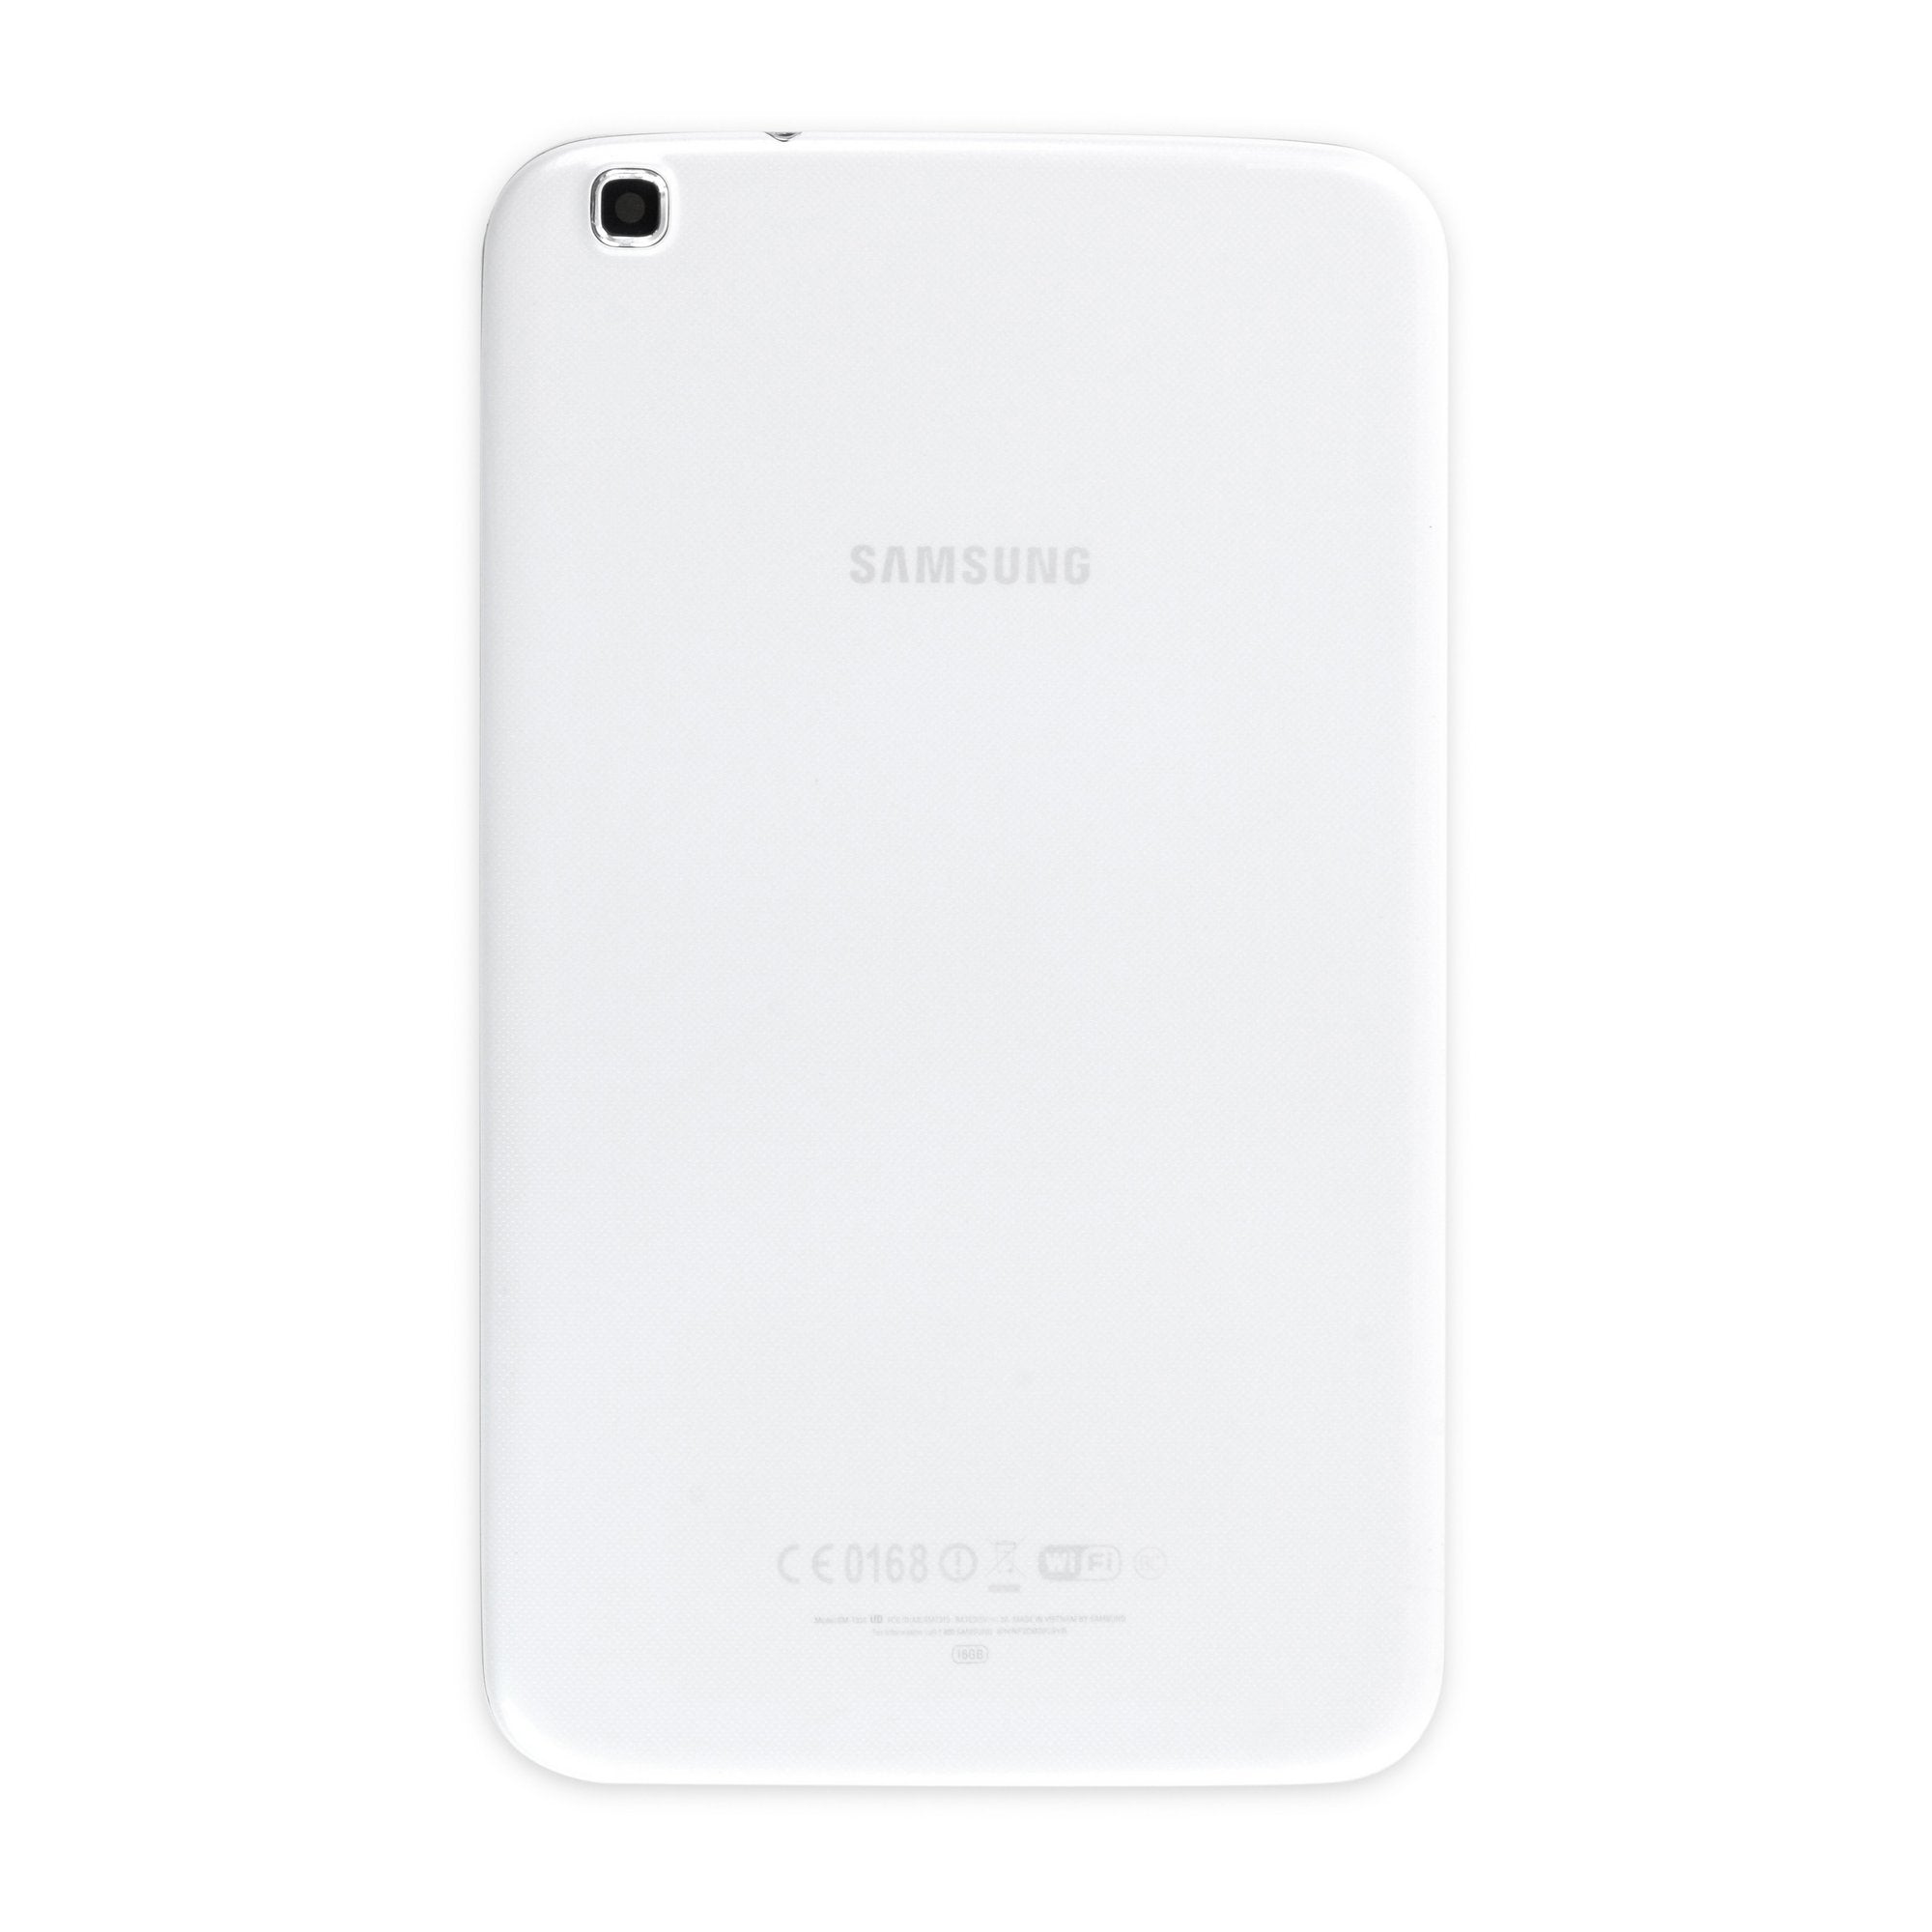 Galaxy Tab 3 8.0 Rear Case White Used, A-Stock